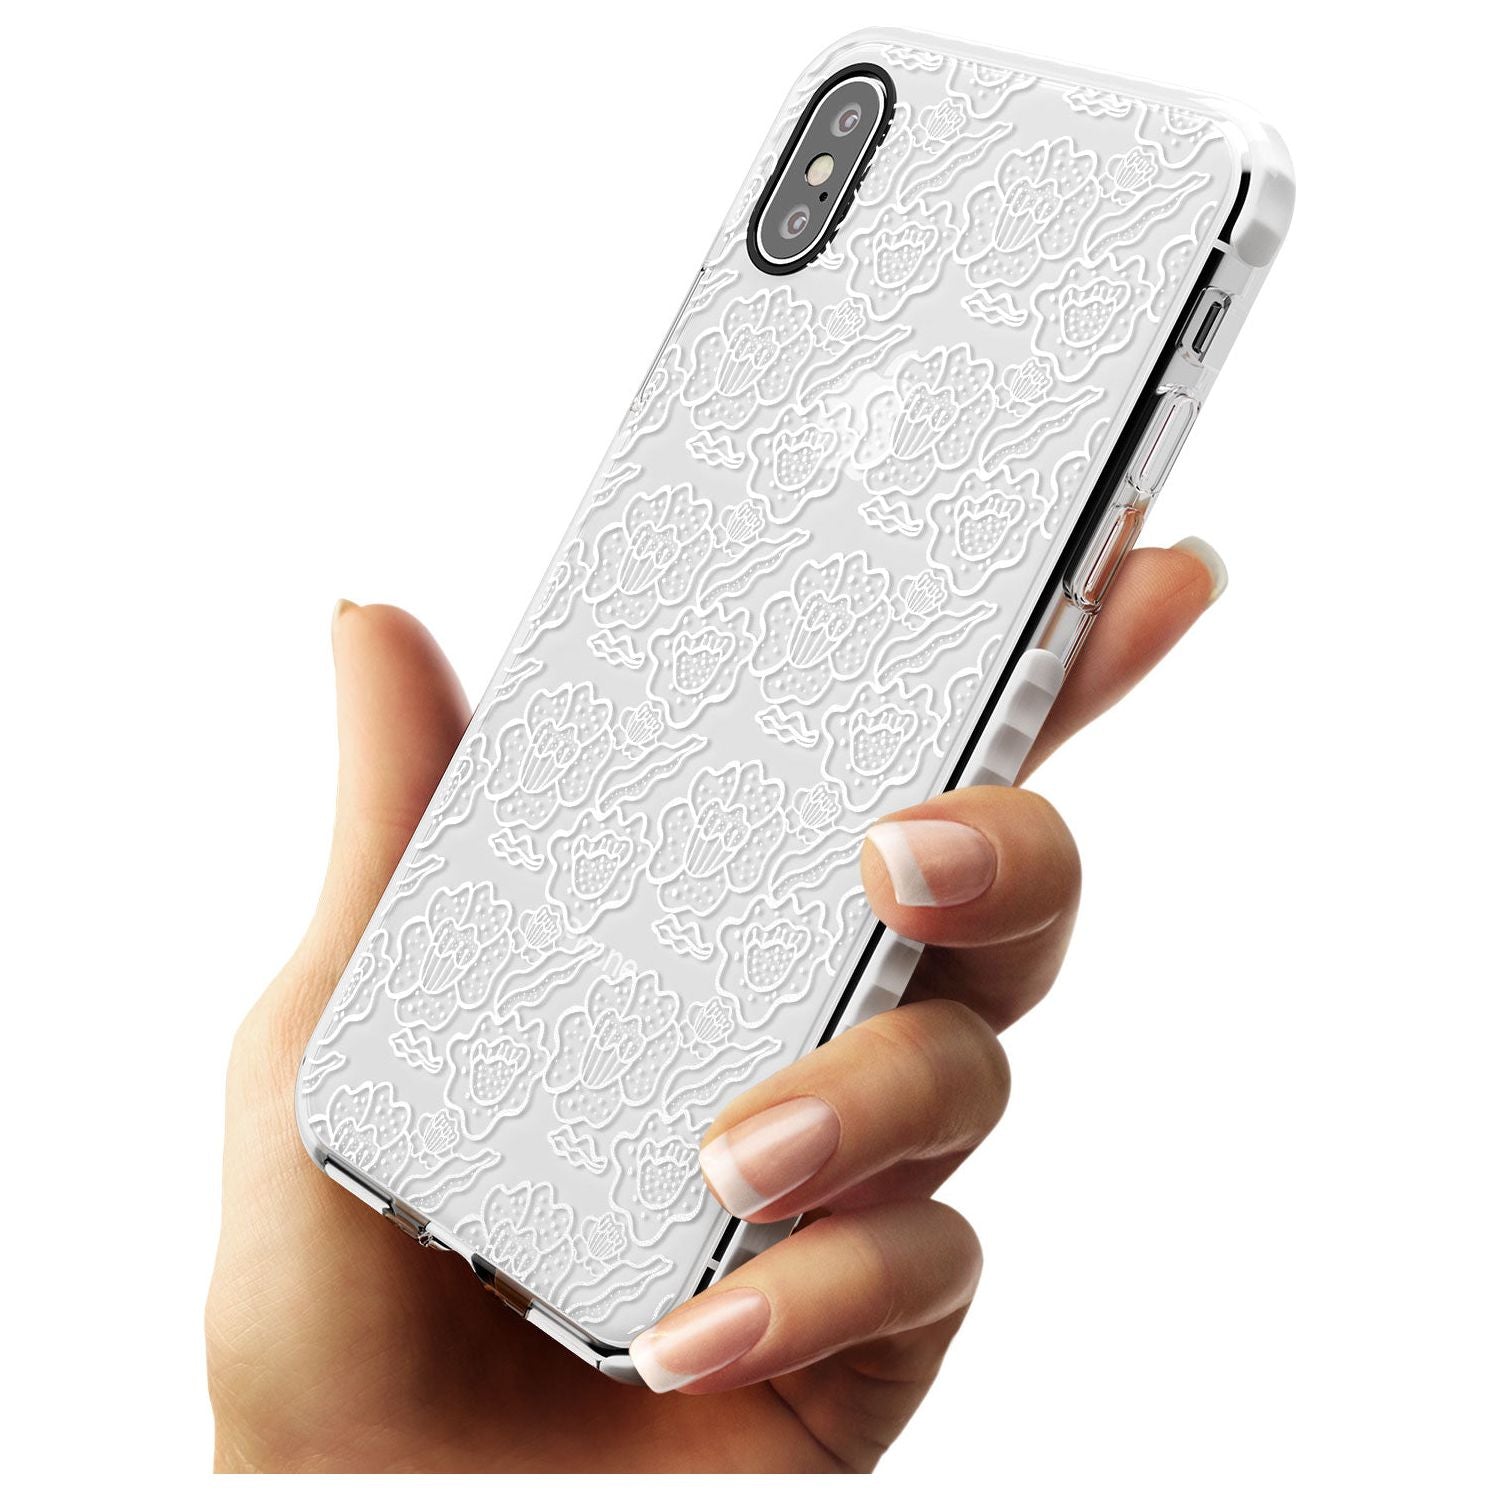 Funky Floral Patterns White on Clear Impact Phone Case for iPhone X XS Max XR